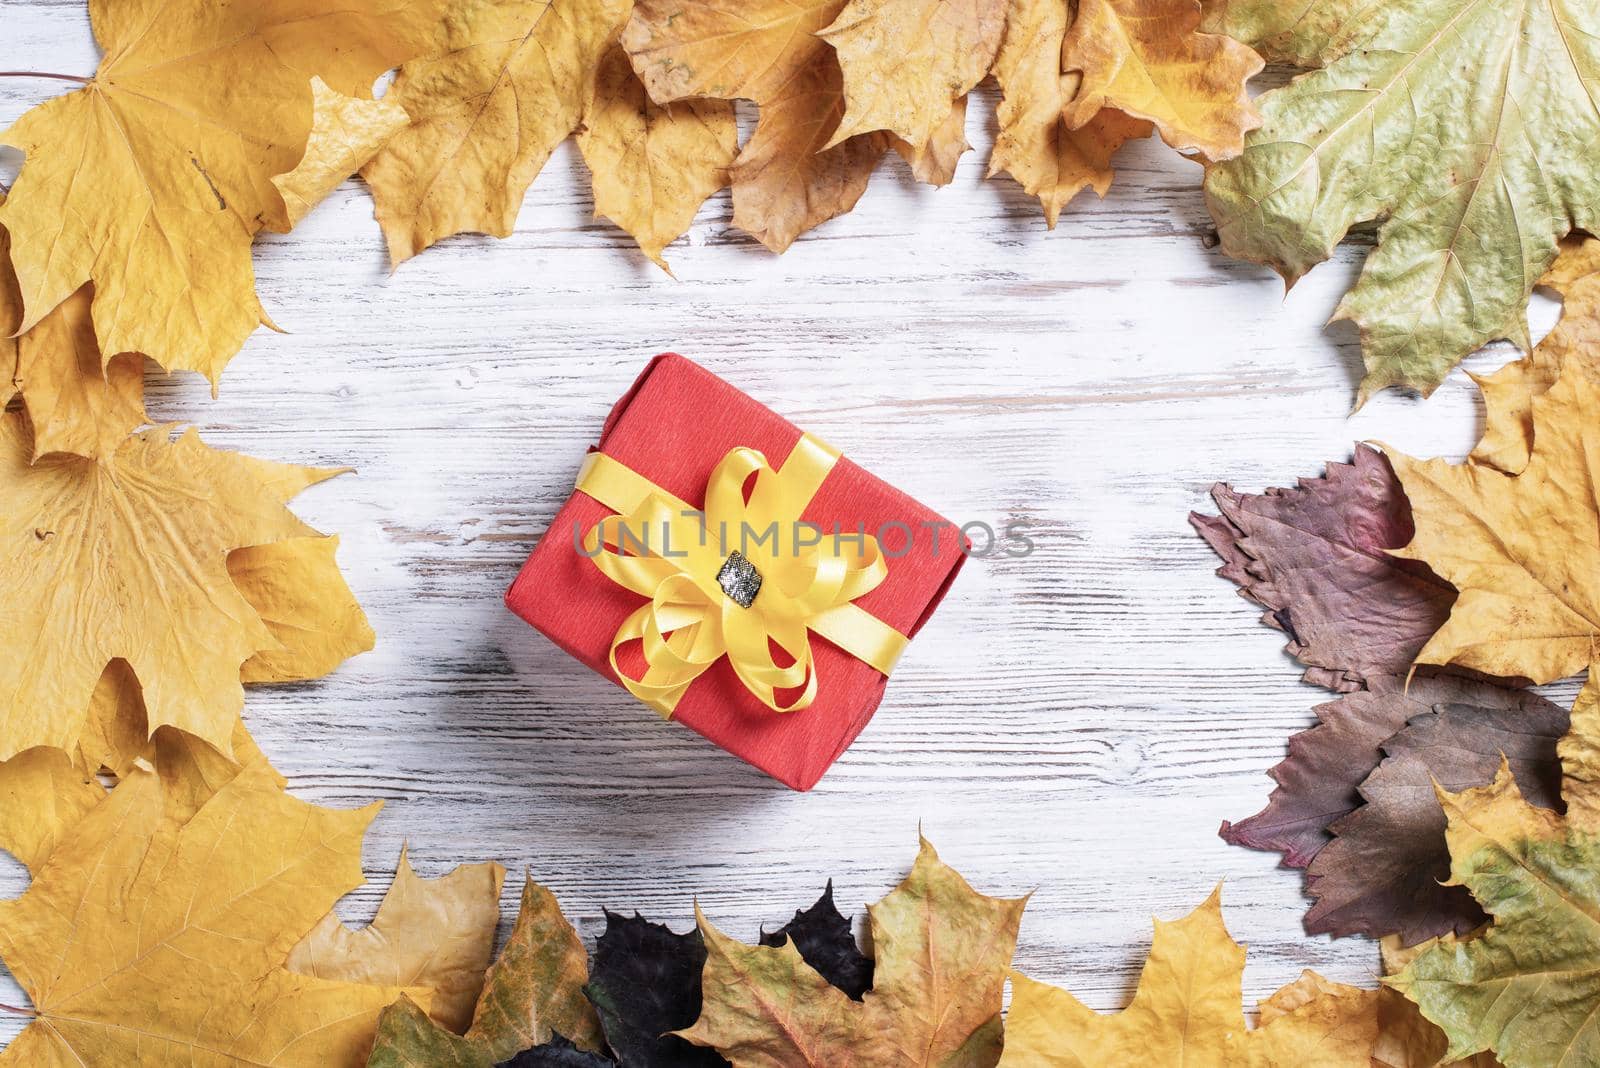 Bright autumn composition with gift box and yellow maple leaves. Holiday present decorated yellow ribbon bow lies on vintage wooden desk. Happy thanksgiving congratulation. Autumn sale advertising.